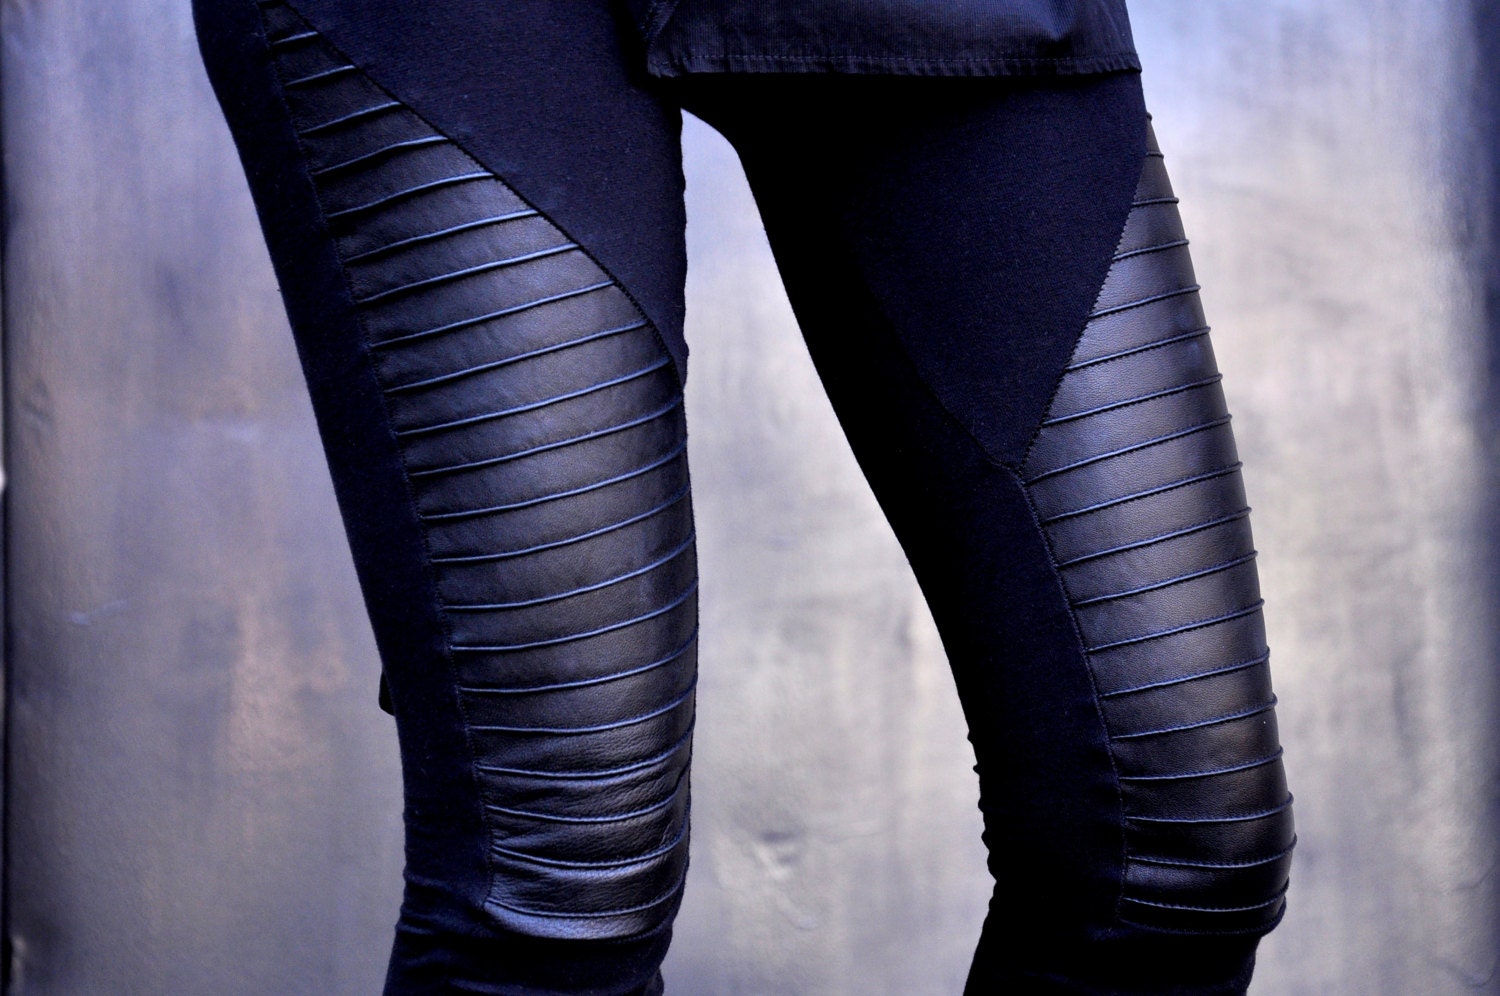 NEW COLLECTION Black Extra Long Leggings / Genuine Leather Front / Viscose  Back by Aakasha A05125 